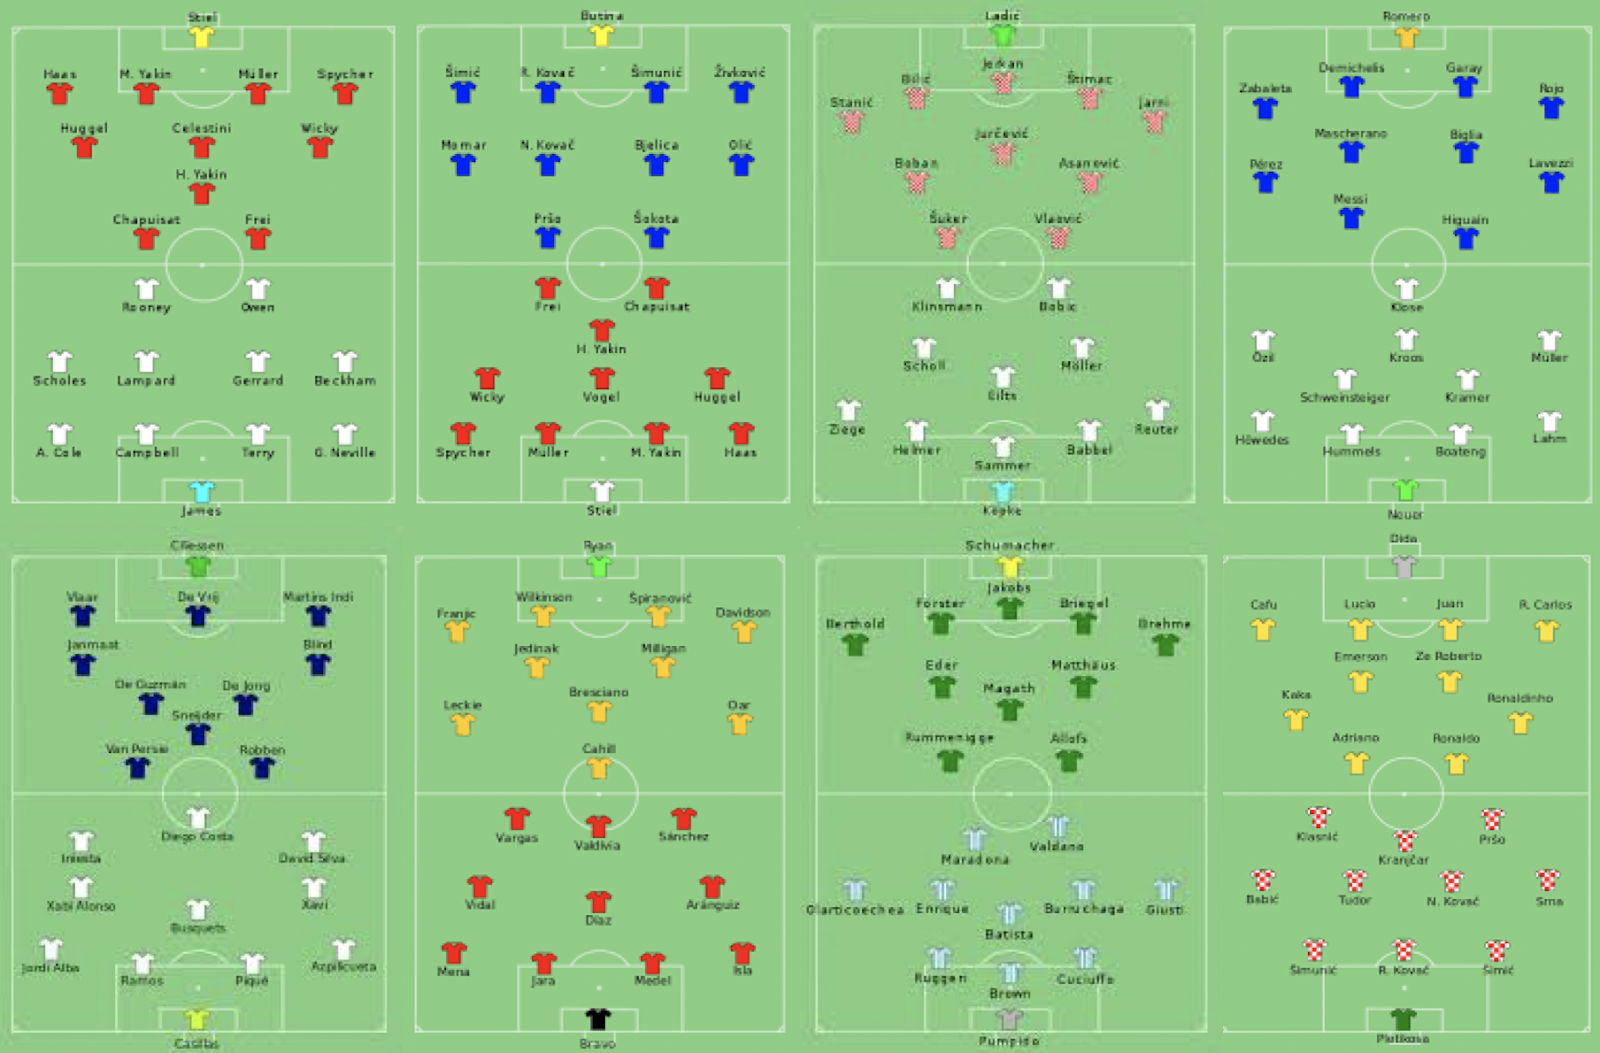 Using Data To Analyse Team Formations